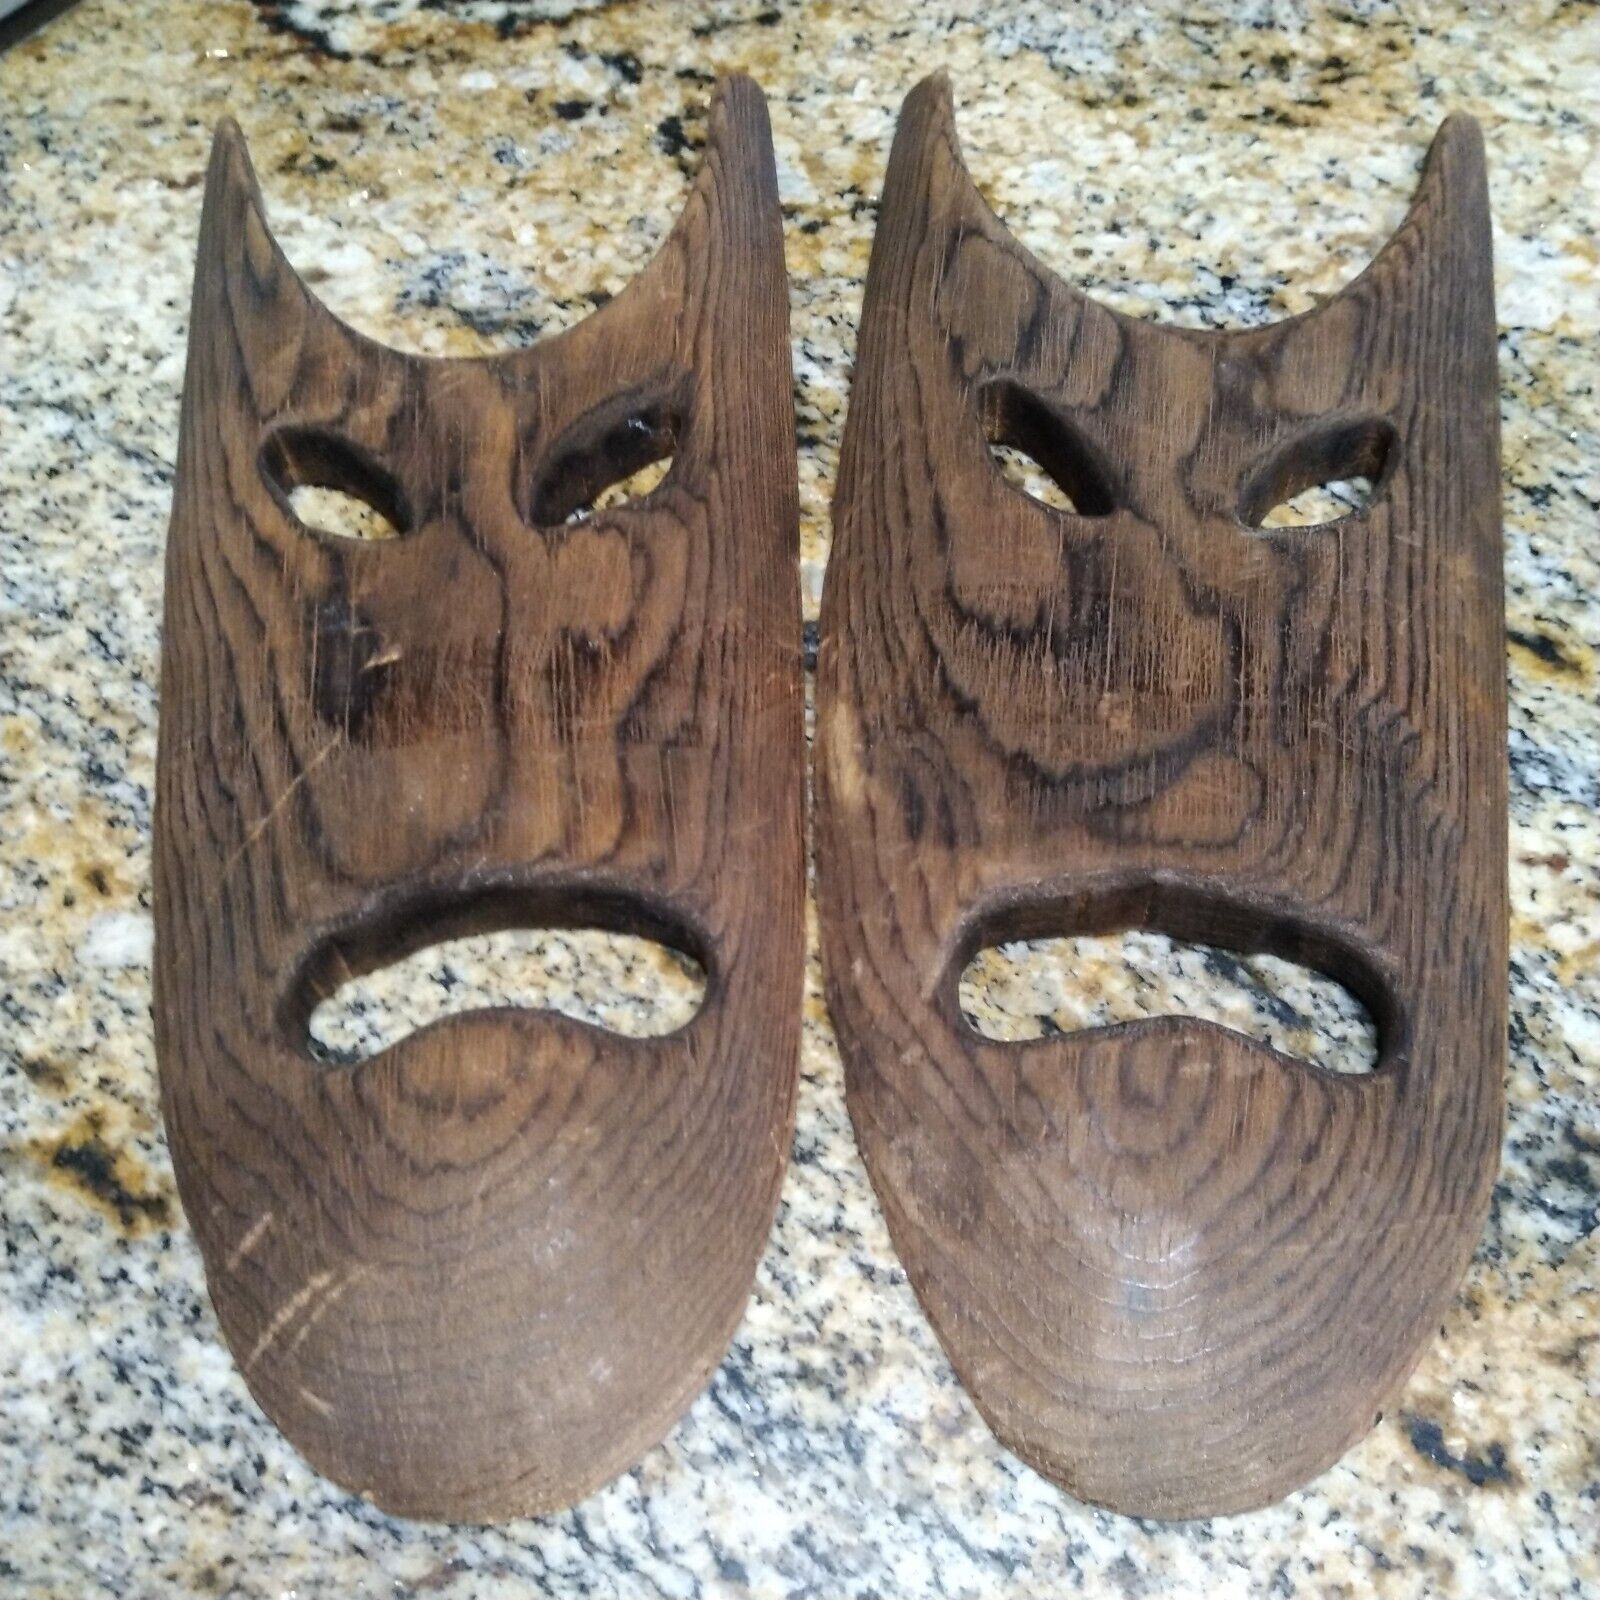 Vtg Lot of 2 South African Tribal Art Hand Carved Wood Face Mask Wall Decor 11x5